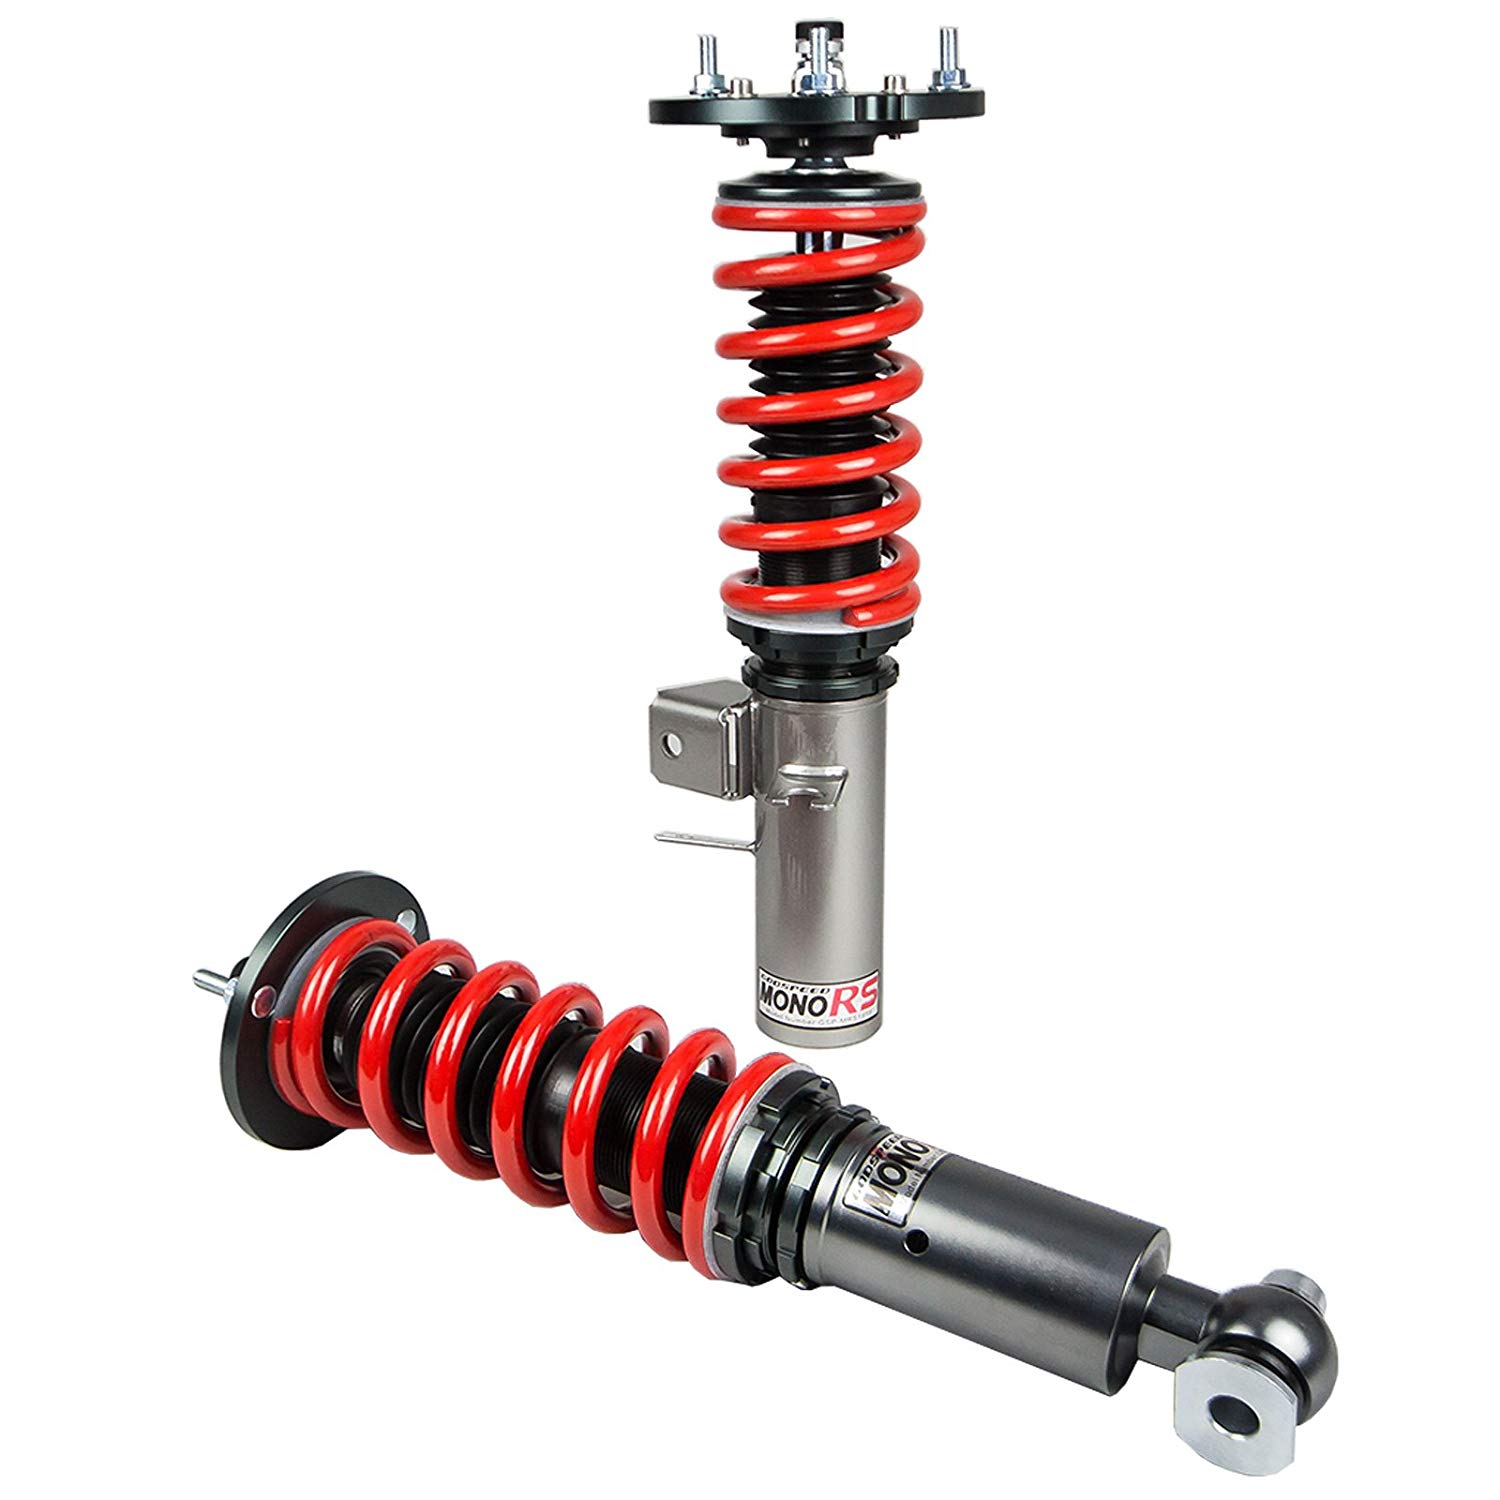 Godspeed MSS0174-B MonoSS Coilover Lowering Kit, Fully Adjustable, Ride Height, Spring Tension And 16 Click Damping, for BMW 6-Series (E24) 83-89